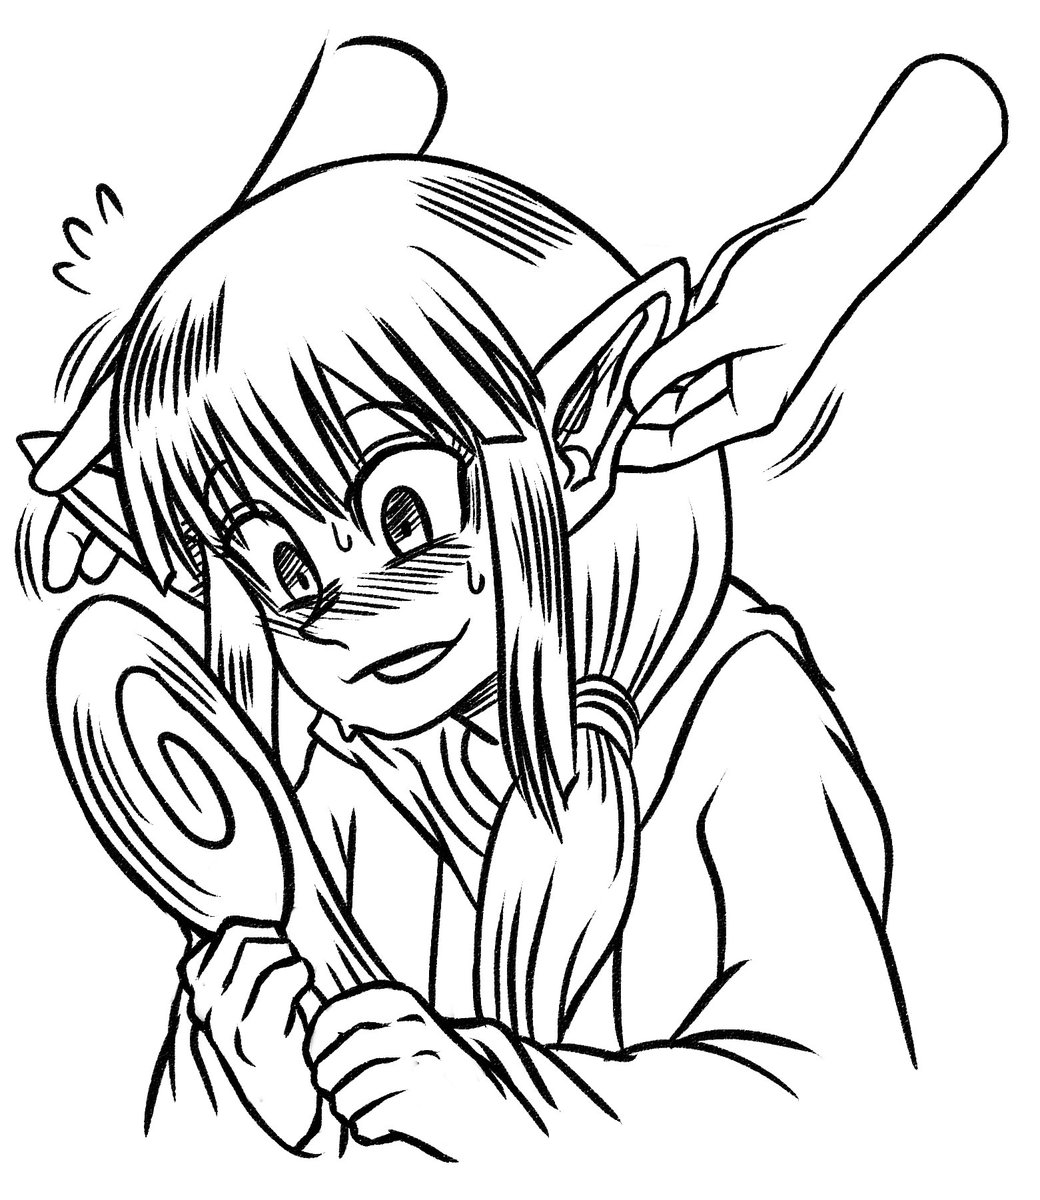 Gonna do some Kaiba comics this week, hope you like Yugioh. Here's some elf ears in the meantime 